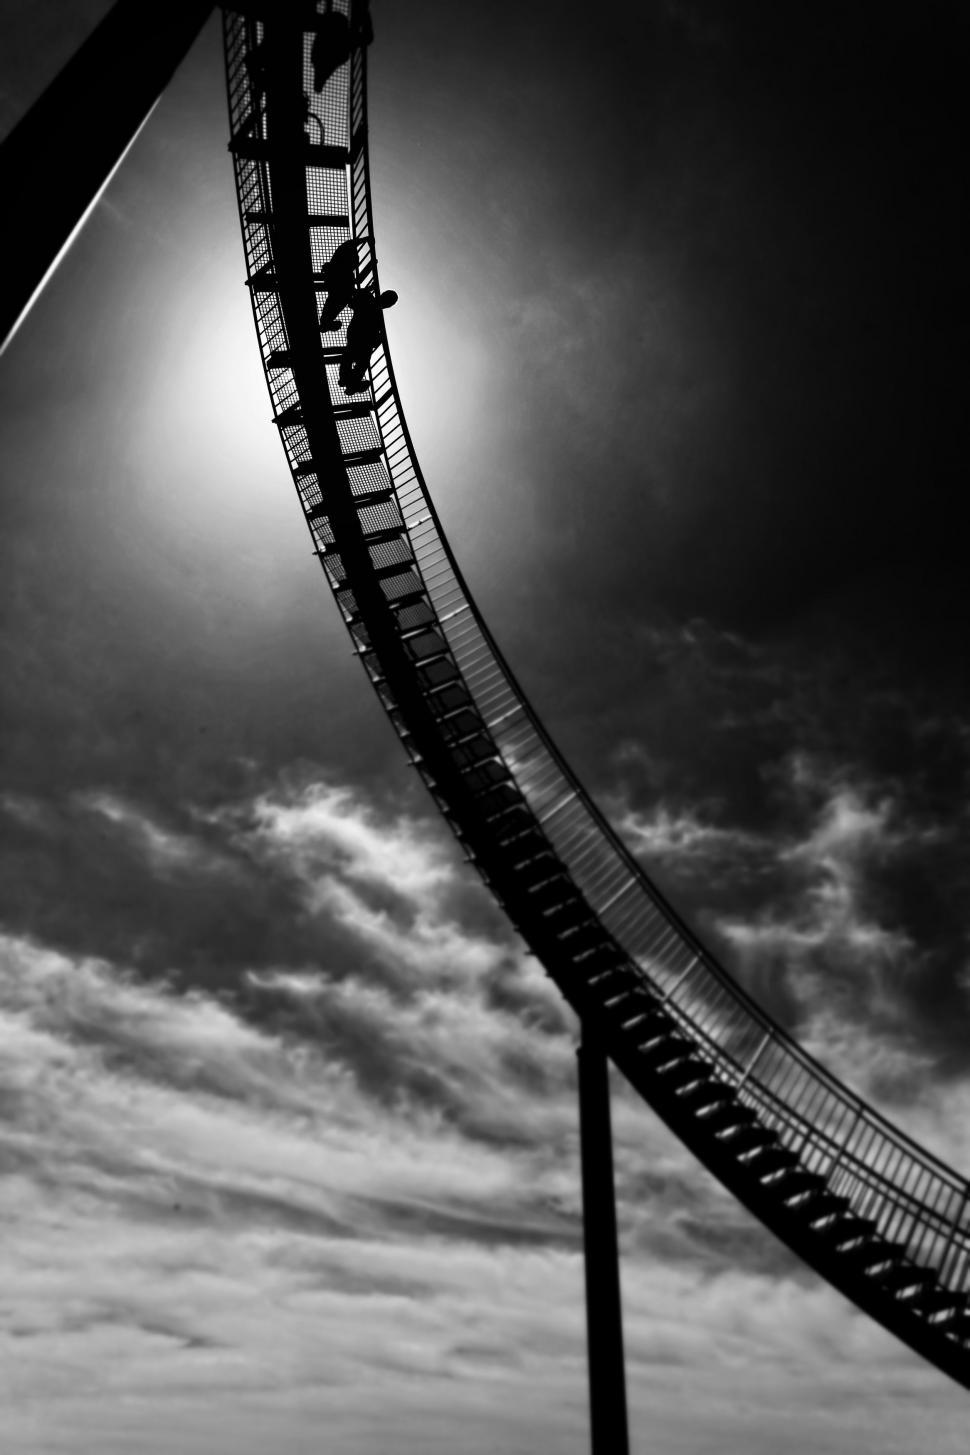 Free Image of Roller Coaster Ride in Black and White 